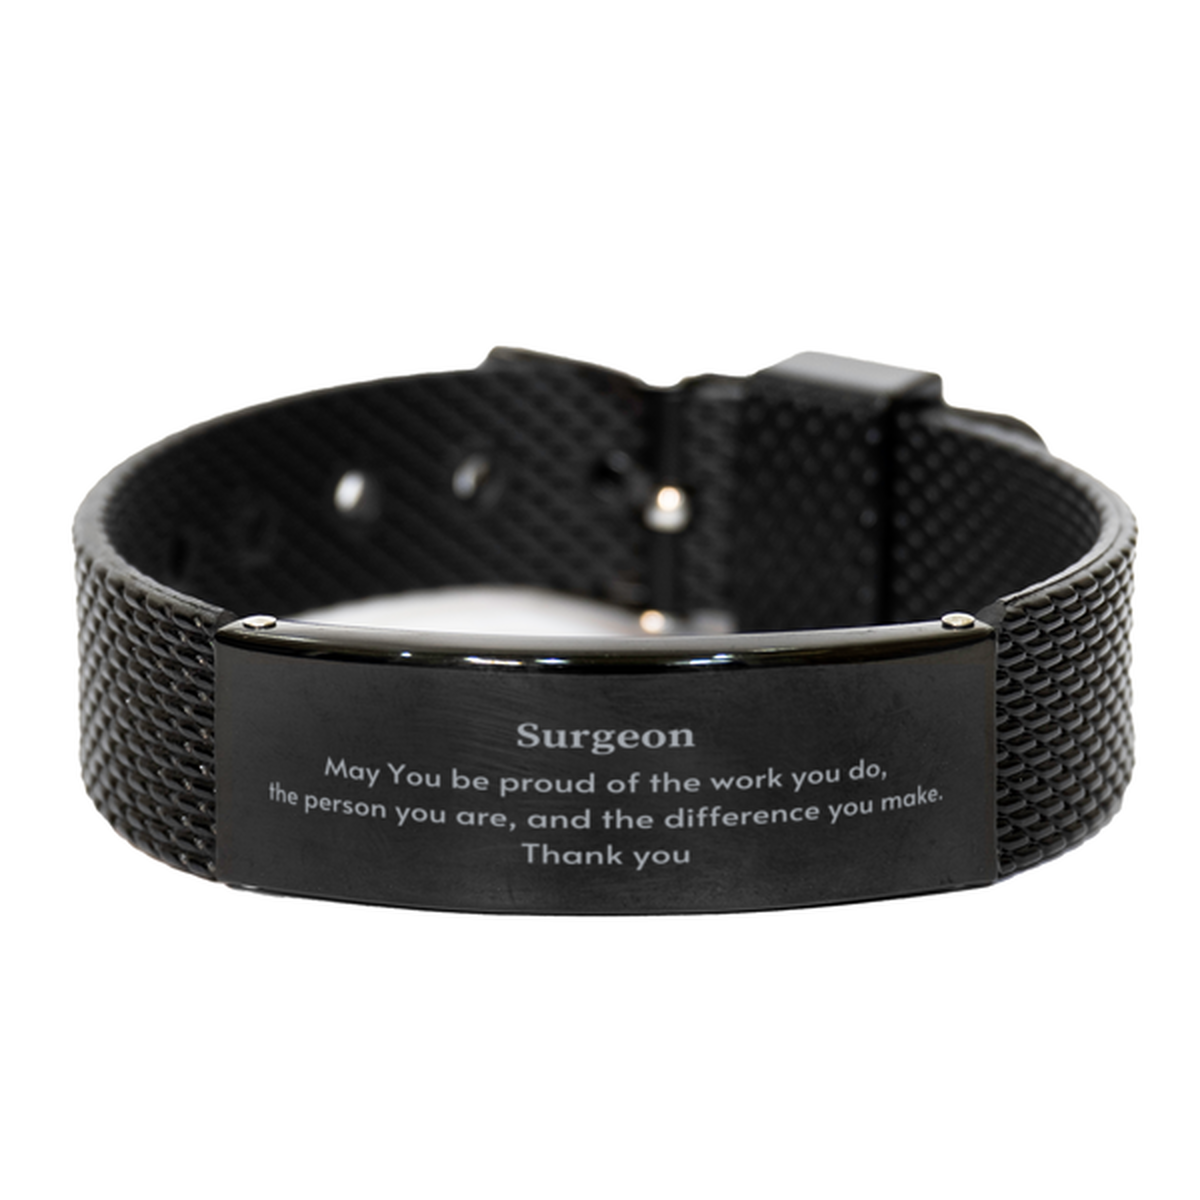 Heartwarming Black Shark Mesh Bracelet Retirement Coworkers Gifts for Surgeon, Surgeon May You be proud of the work you do, the person you are Gifts for Boss Men Women Friends